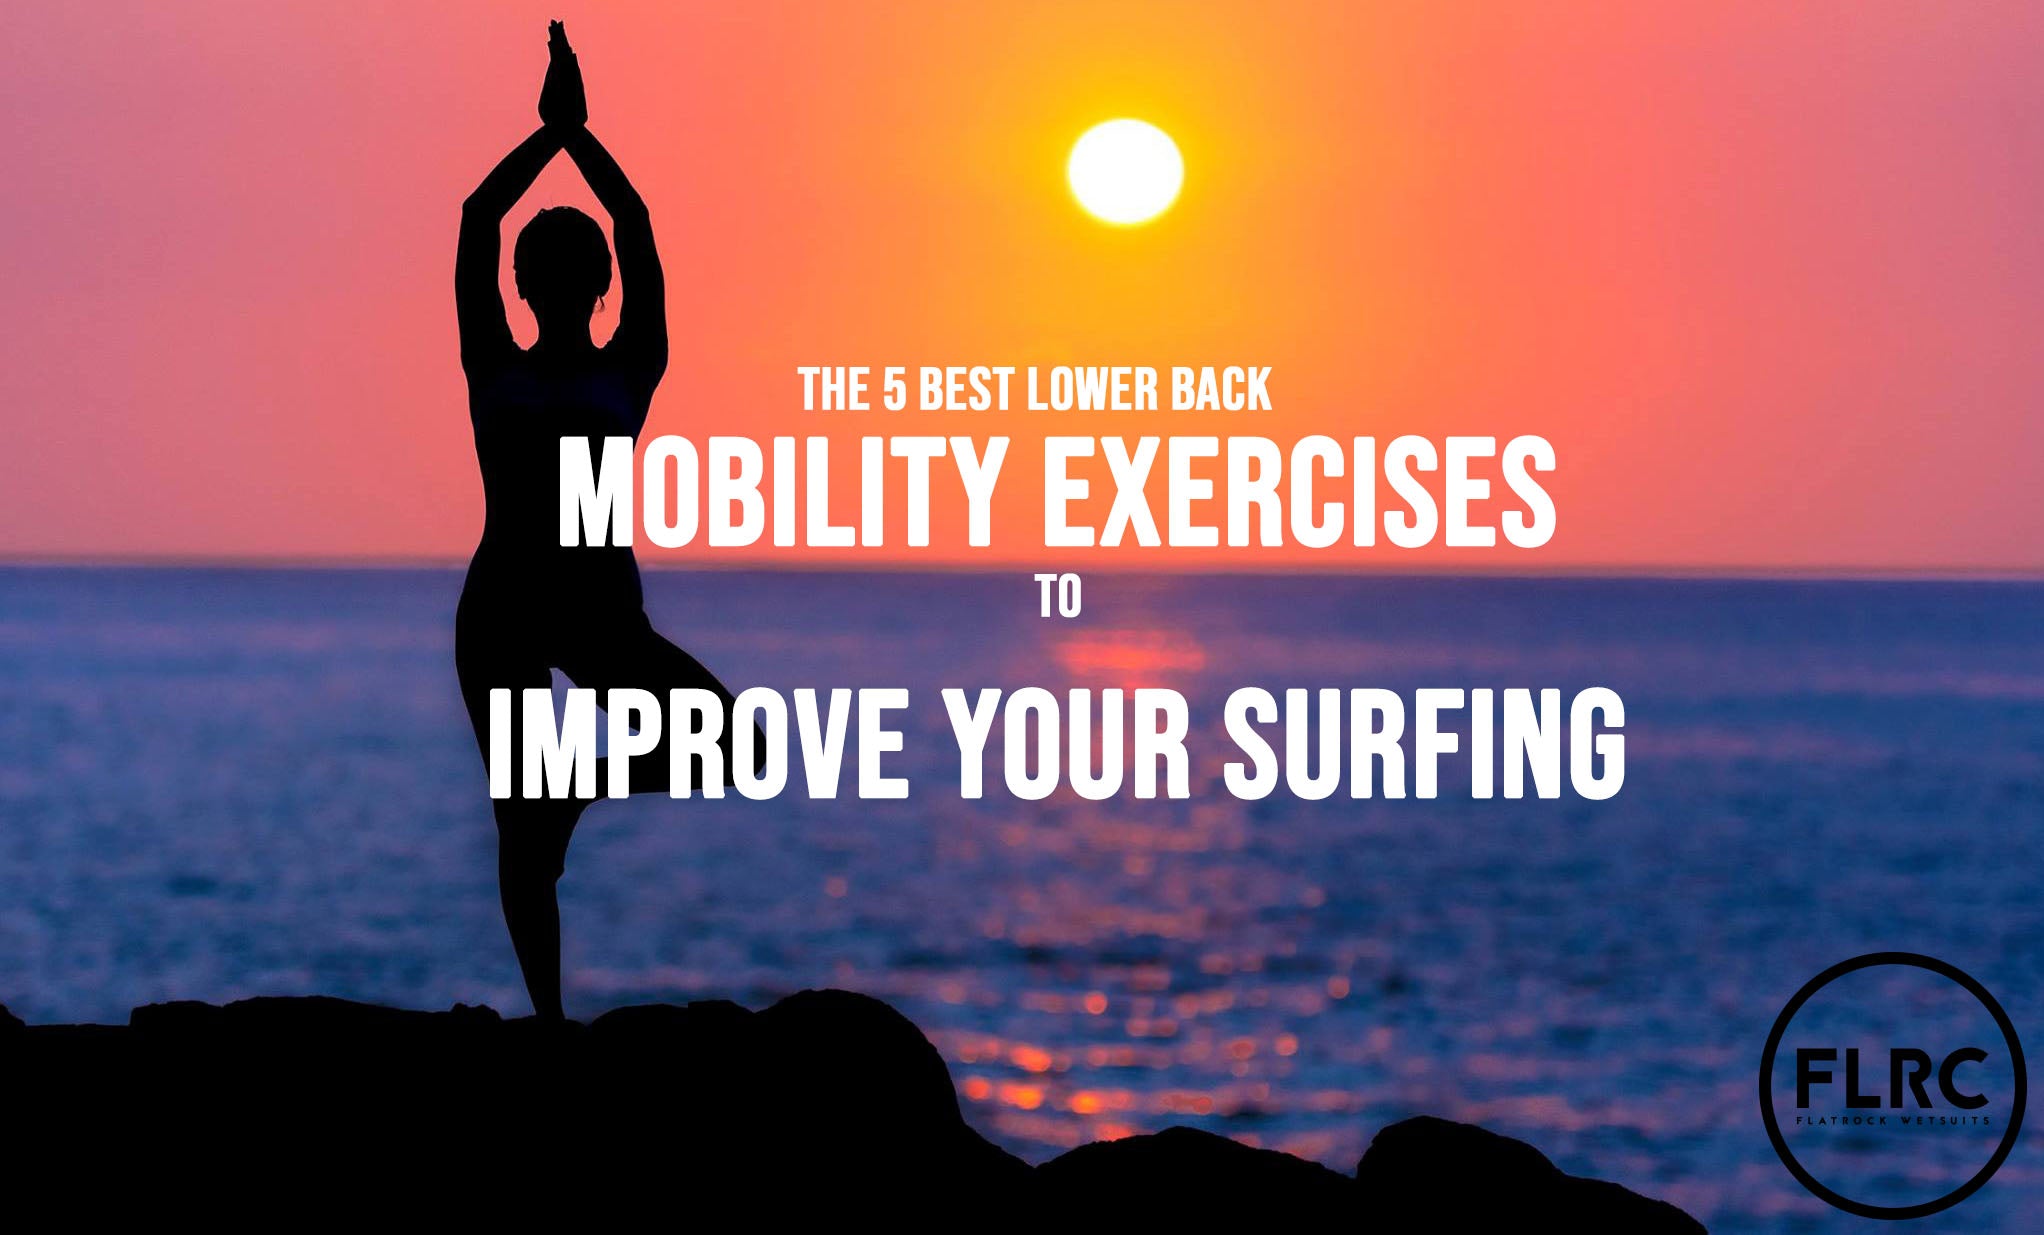 The 5 Best Lower Back Mobility Exercises to Improve Your Surfing